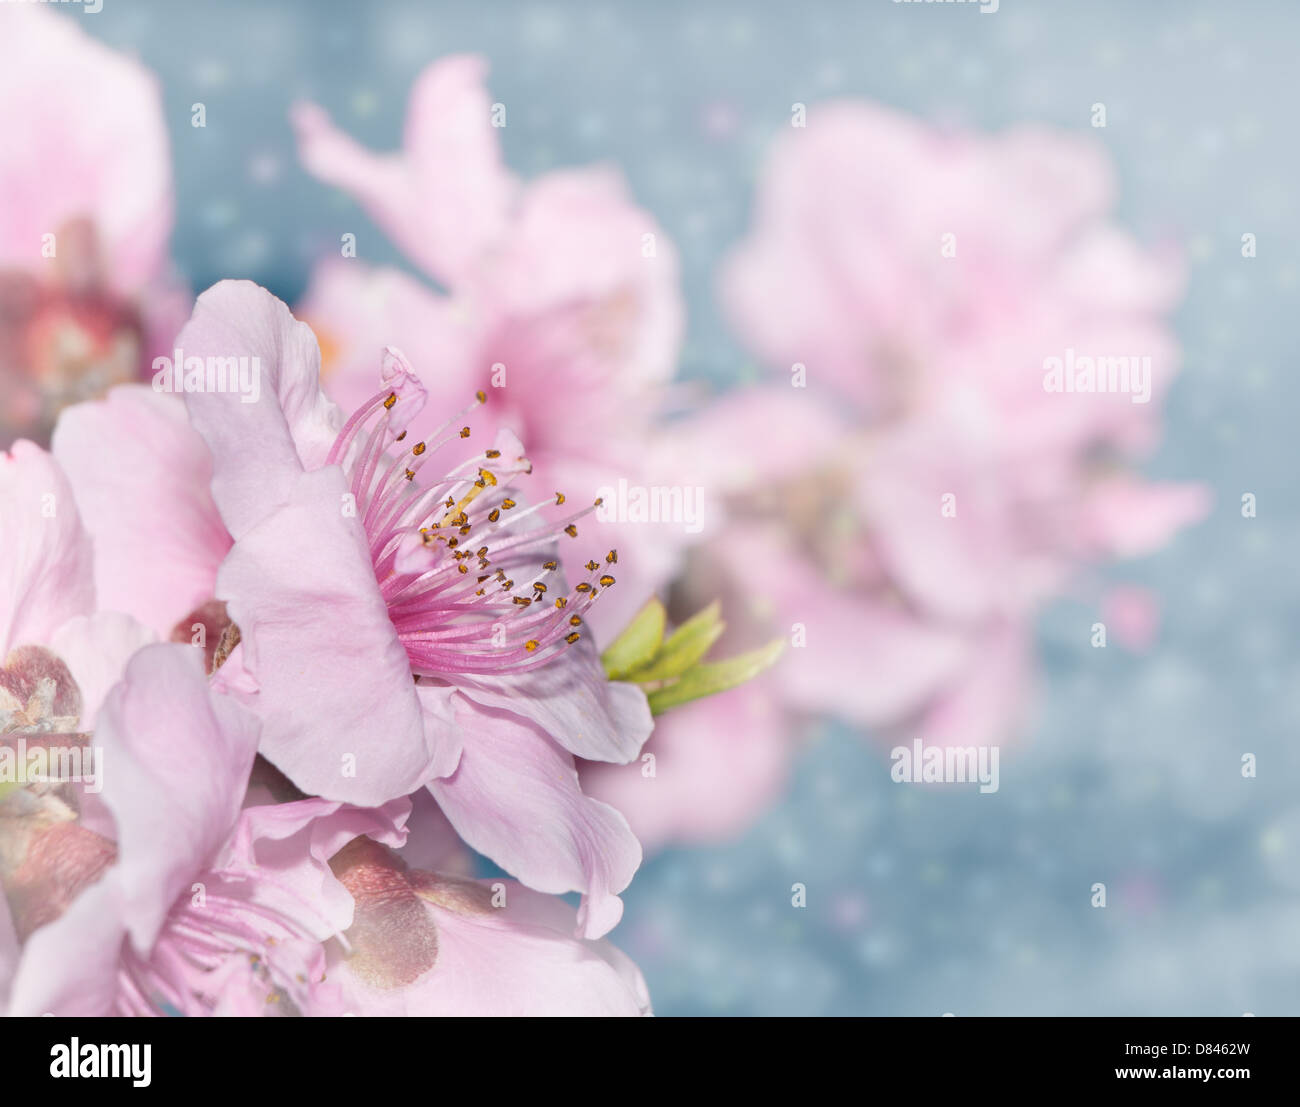 Dreamy image of soft pink peach blossoms on light blue bokeh background Stock Photo